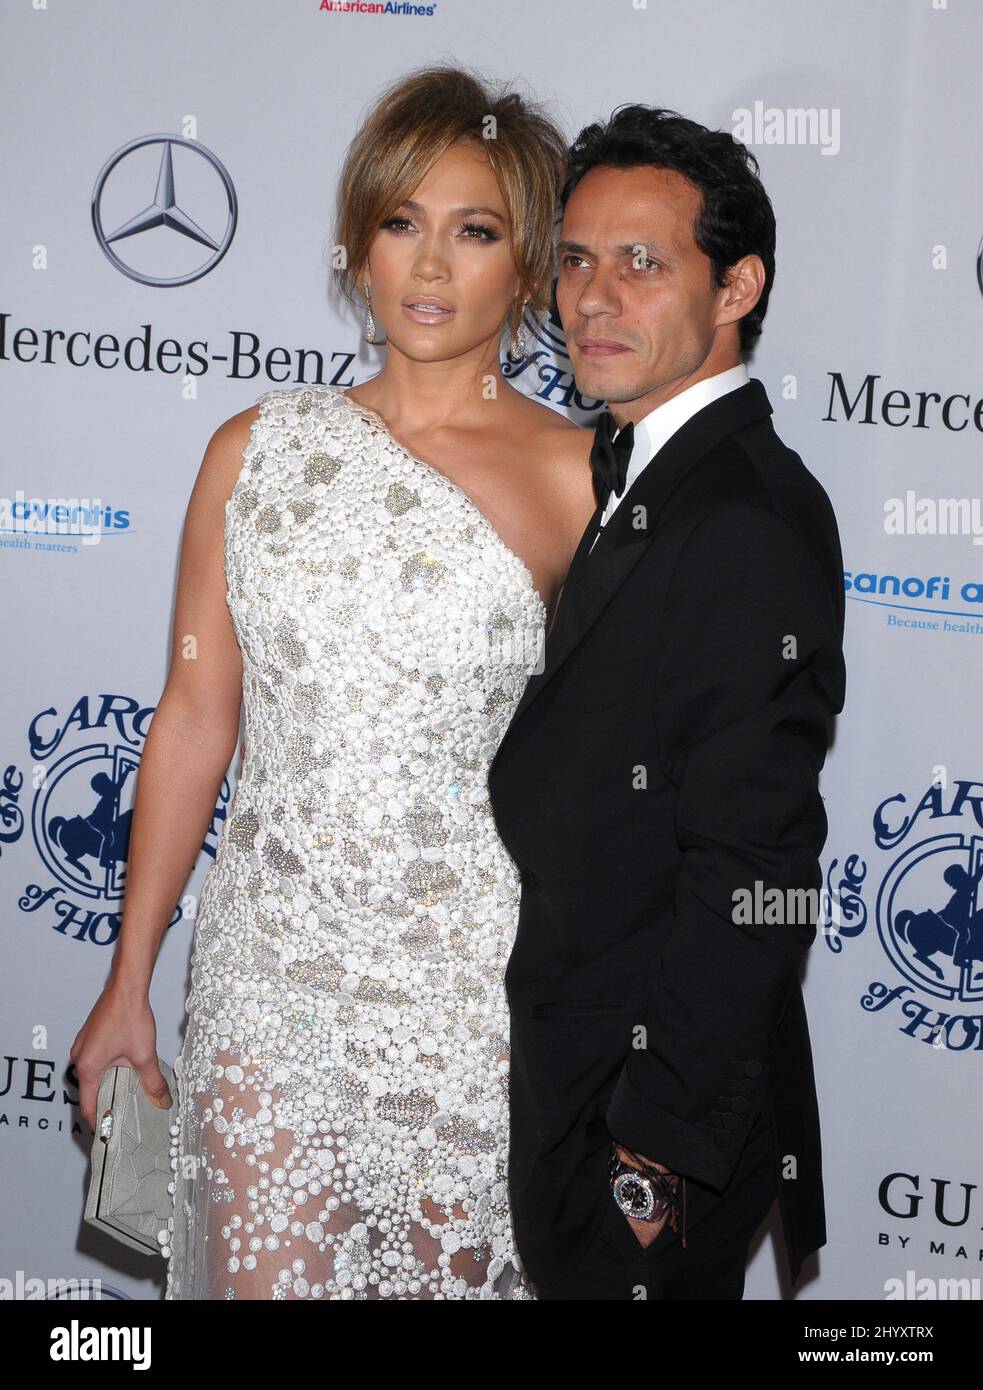 Jennifer Lopez And Marc Anthony At The 32nd Annual Carousel Of Hope Ball Held At The Beverly 